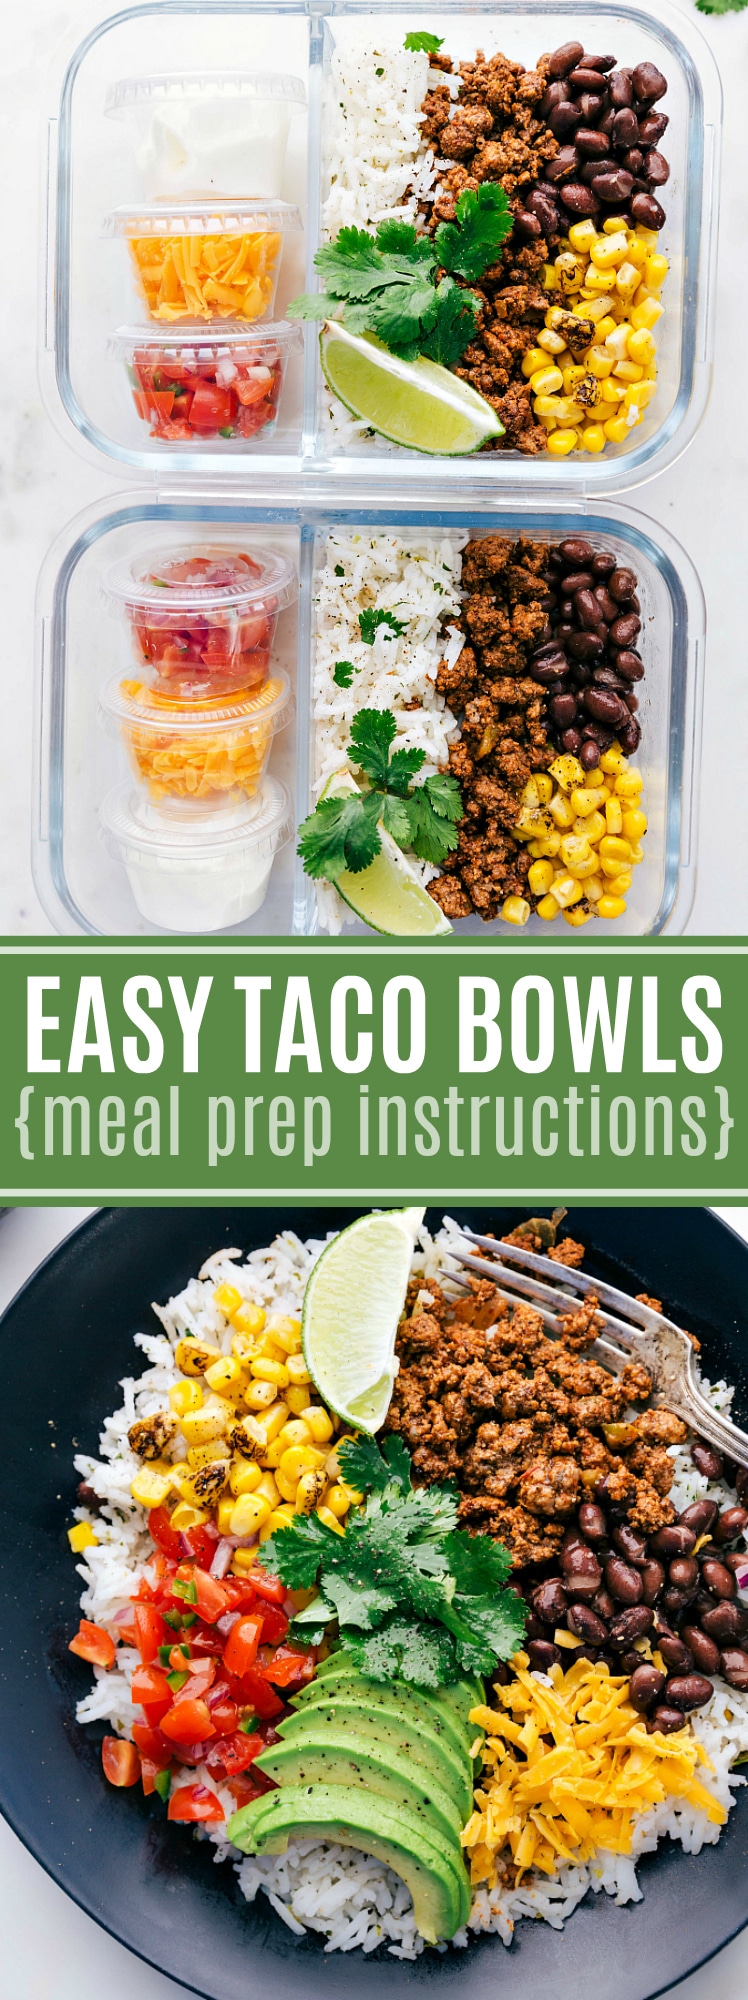 An easy to make taco bowl recipe! This meal is filling, packed with good ingredients, and is a great make ahead weekly meal prep option. via chelseasmessyapron.com #taco #bowl #easy #quick #meal #prep #dinner #salad #fast #toppings #weekly #recipe